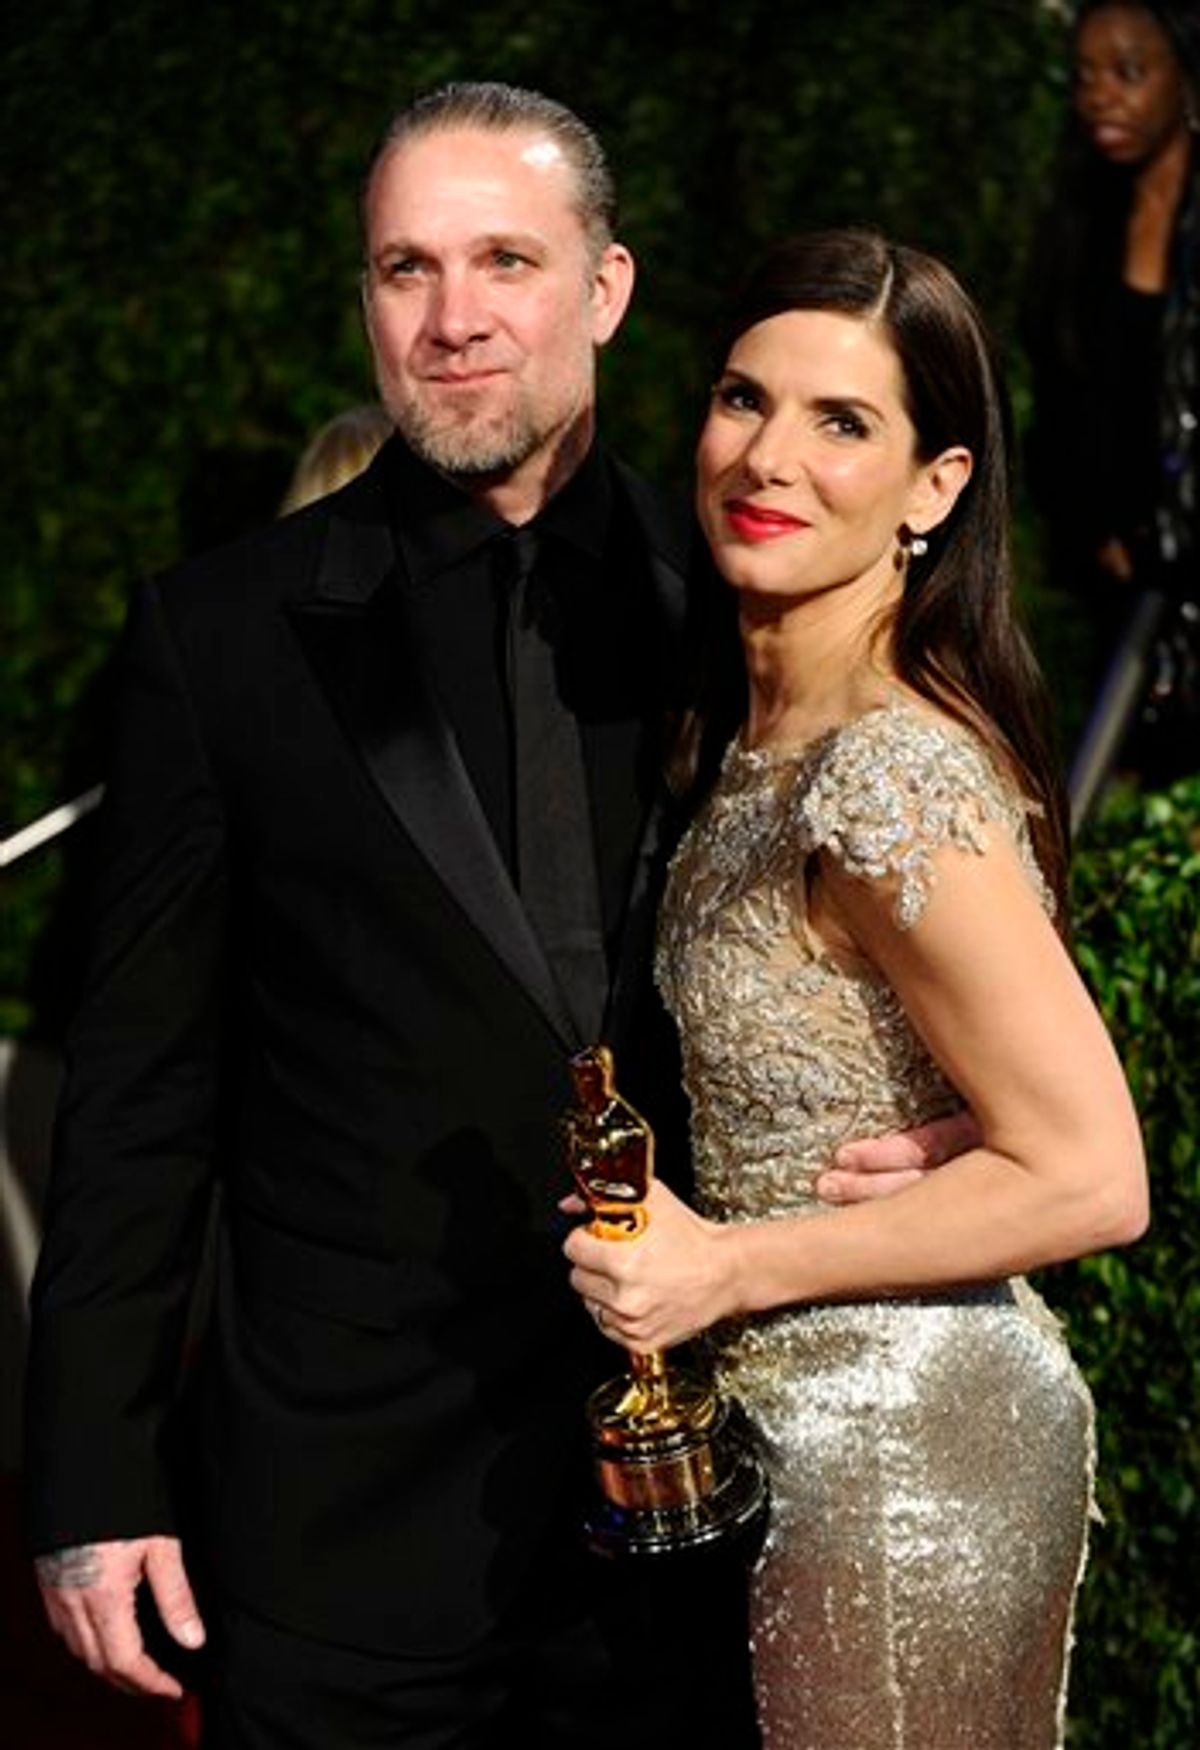 FILE - Sandra Bullock and Jesse James arrive at the Vanity Fair Oscar party on in this March 7, 2010 file photo taken in West Hollywood, Calif. Sandra Bullock has canceled her appearance at the London premiere of "The Blind Side" scheduled for Tuesday March 23, 2010 almost two weeks after winning a Best Actress Academy Award. In a statement released by Warner Bros UK., the 45-year-old actress says she can't attend the event for "unforeseen personal reasons." (AP Photo/Peter Kramer, File)  (AP)